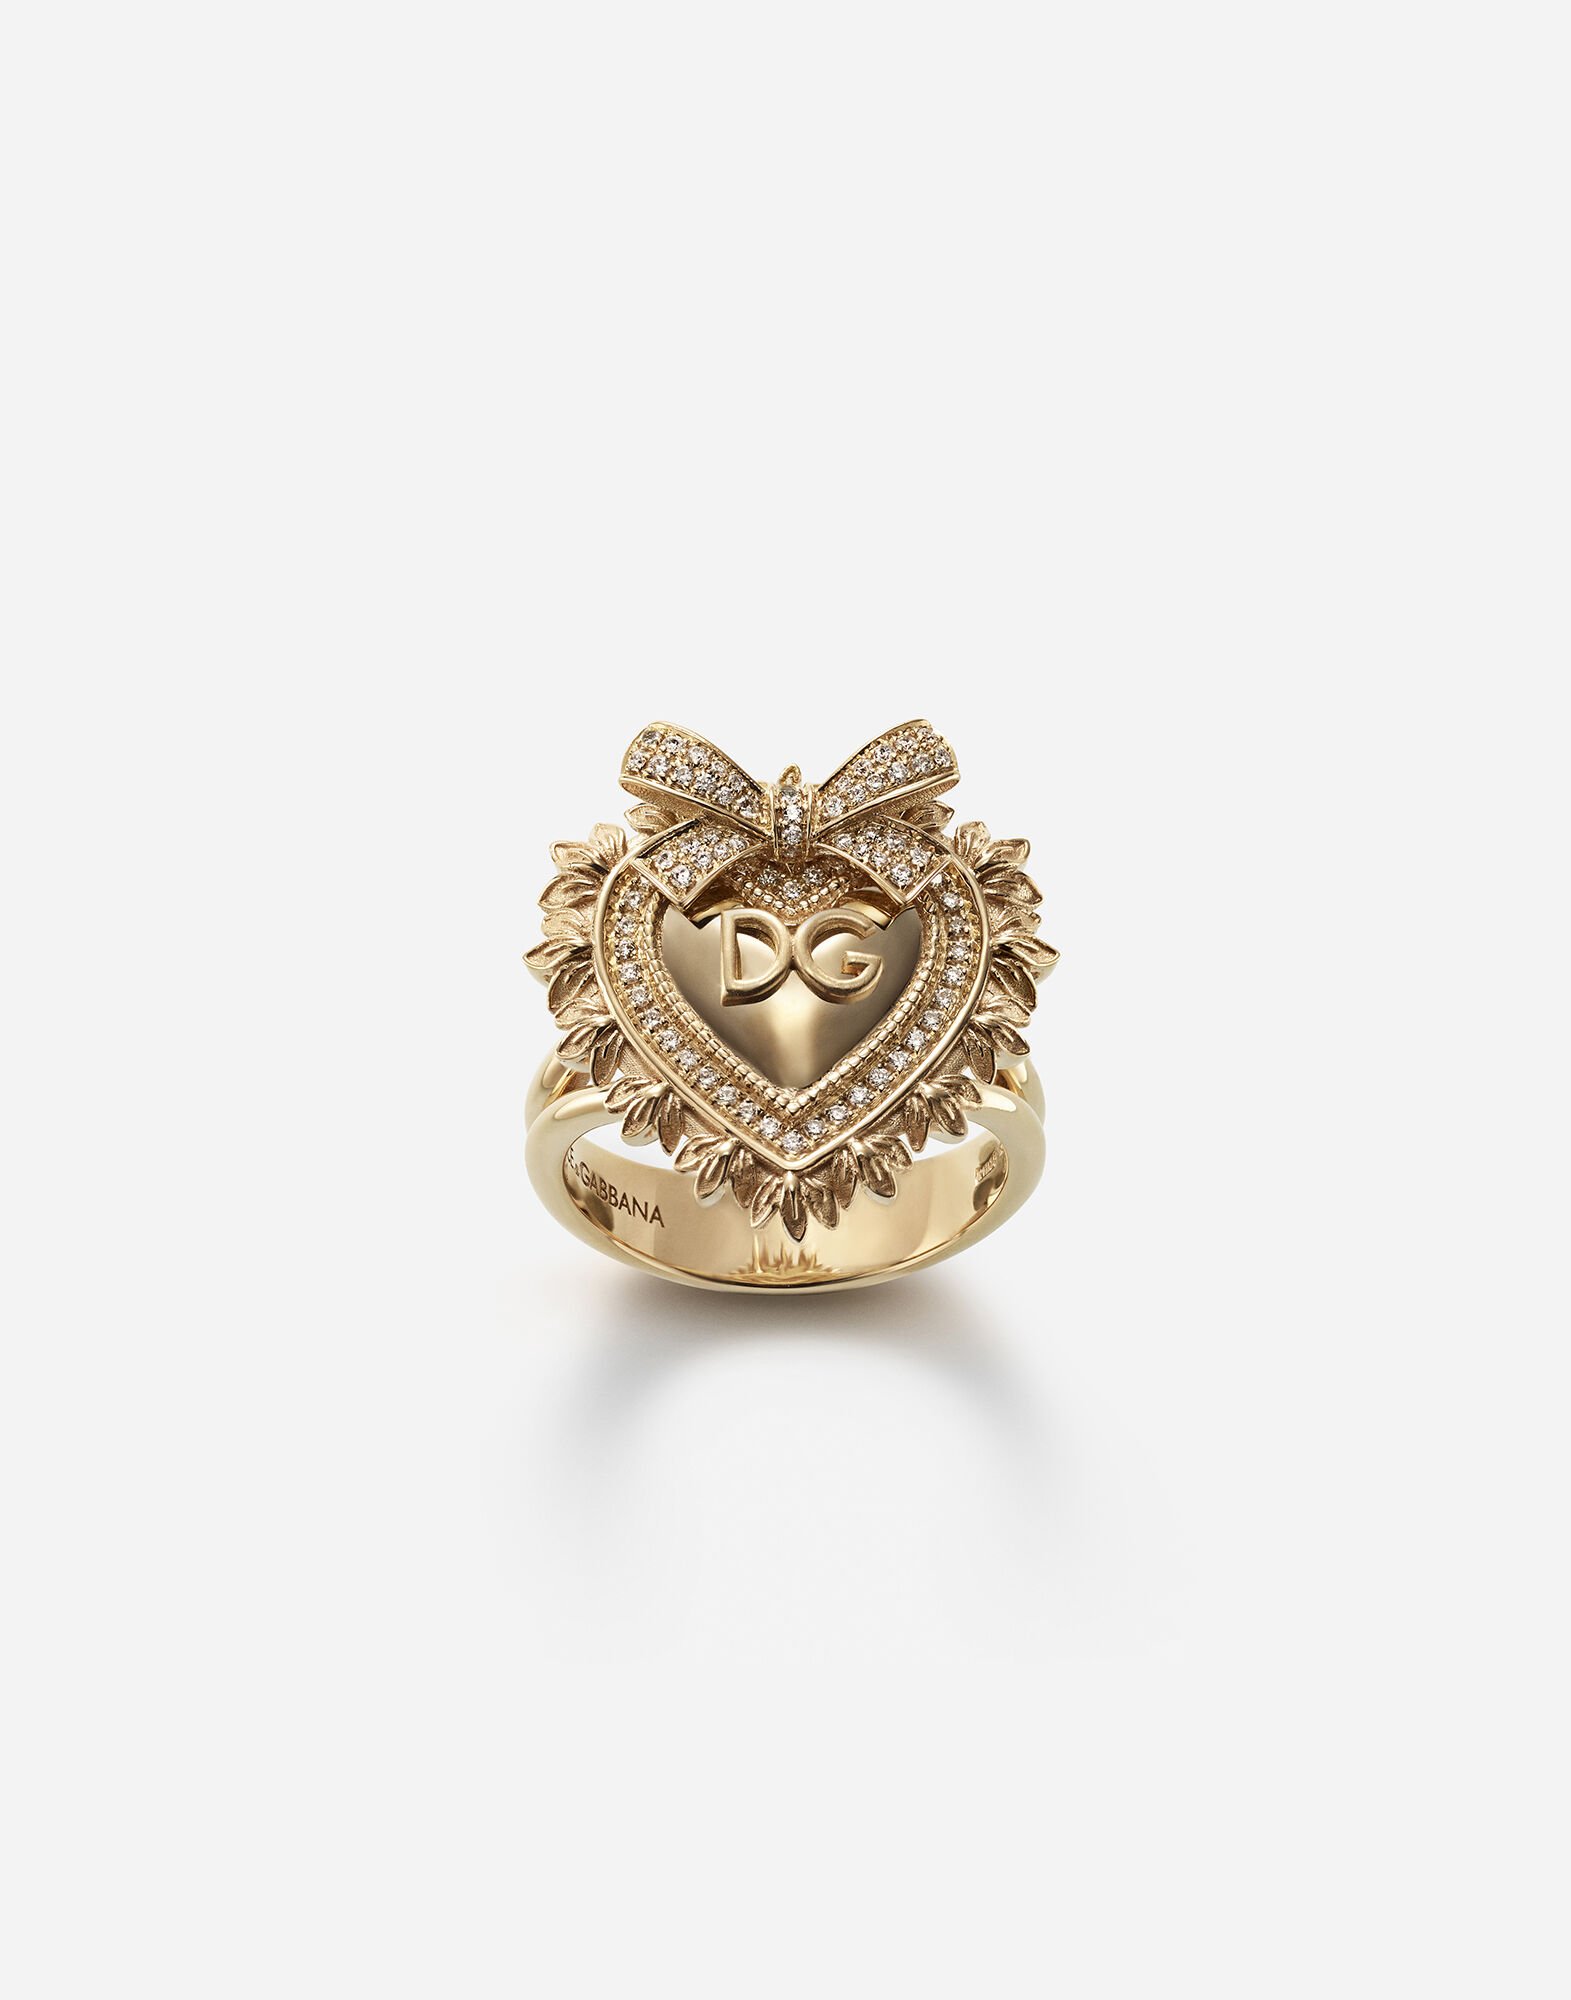 Dolce & Gabbana Devotion ring in yellow gold with diamonds Gold BB6711A1016